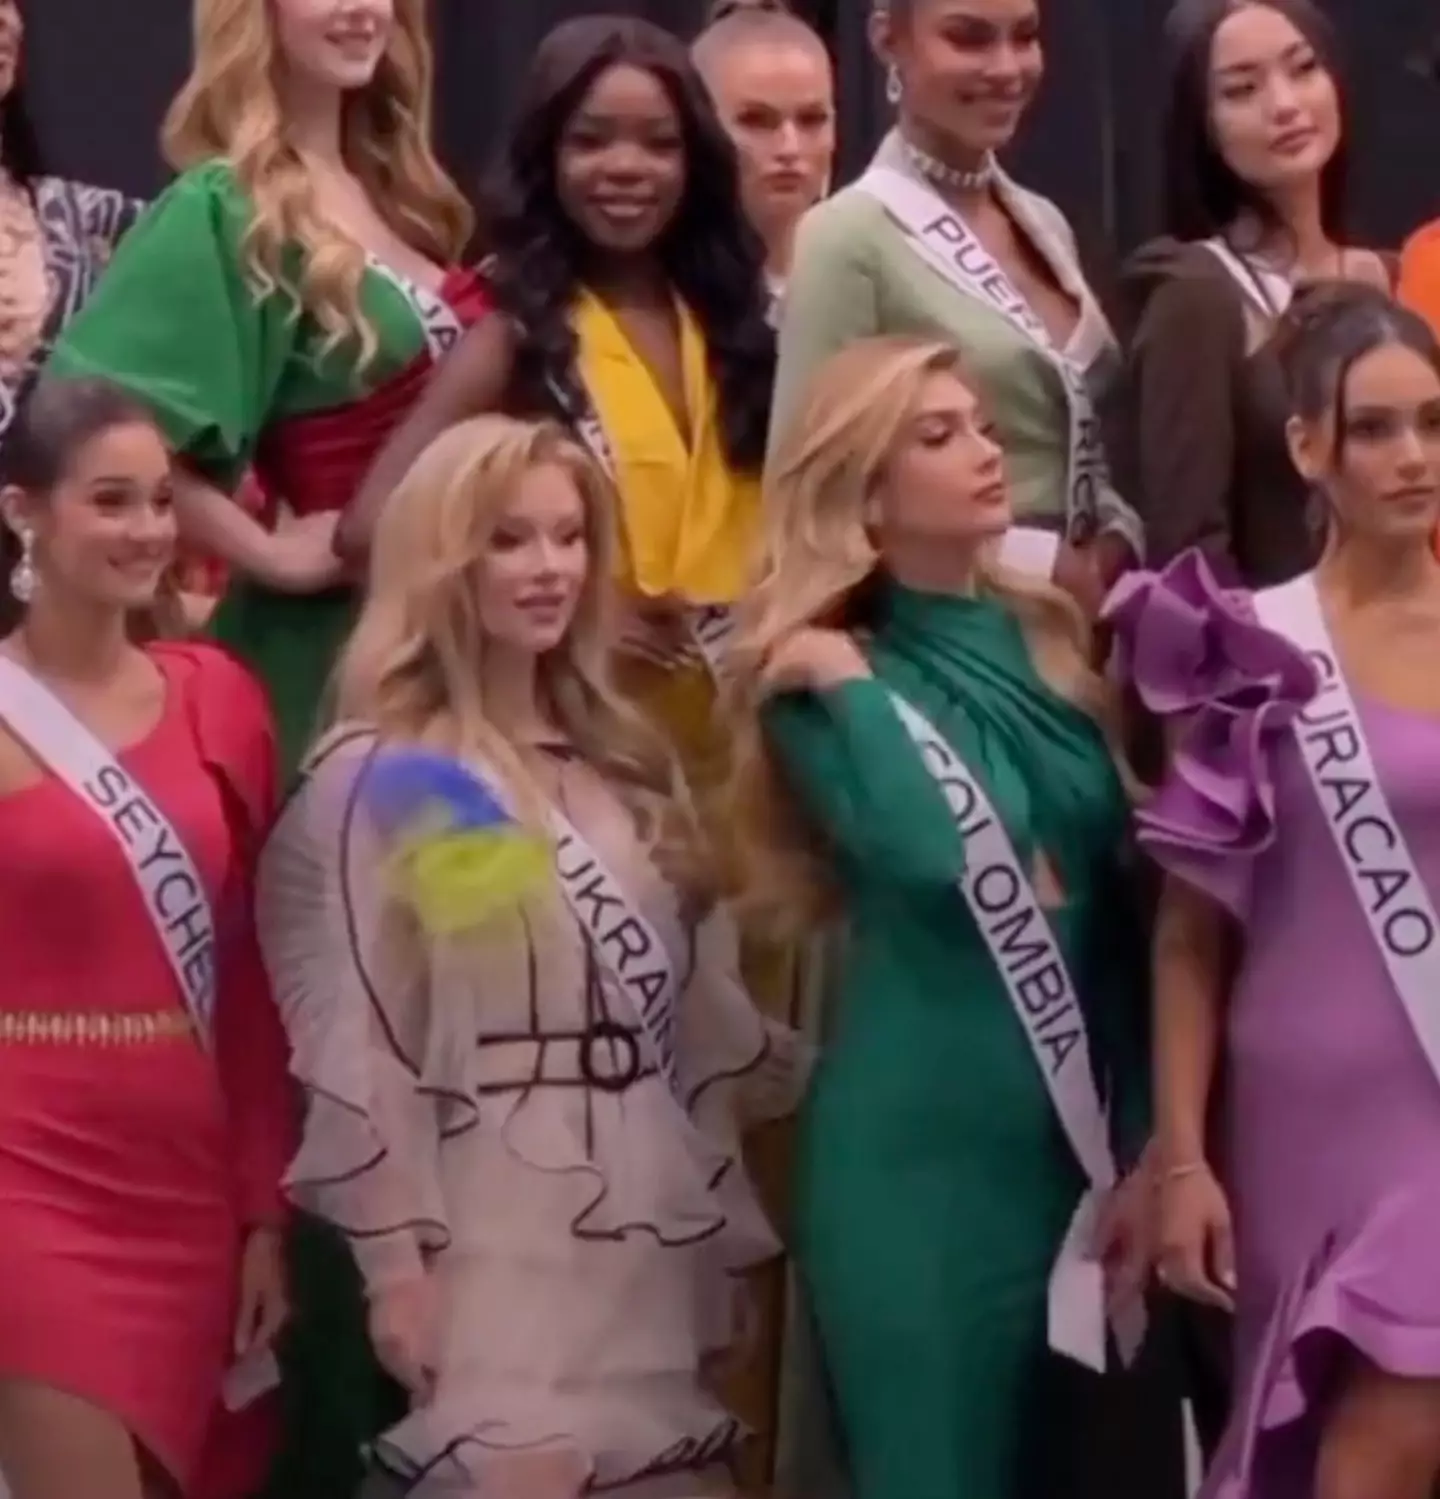 People praised Miss Ukraine and Miss Colombia for switching places.